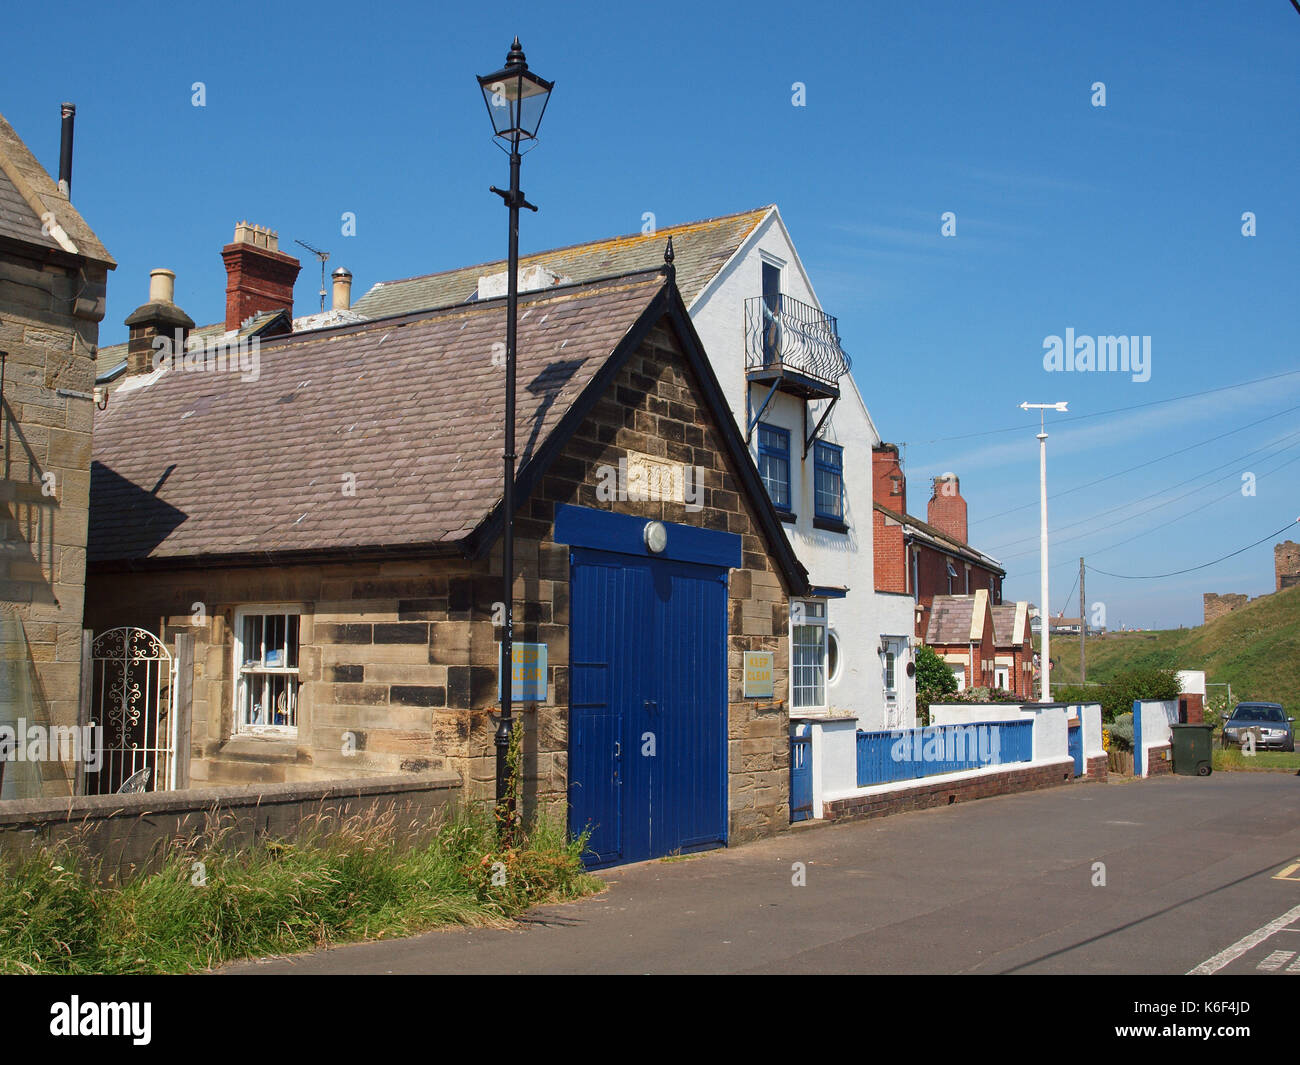 The museum of the 'Volunteer Life Brigade' at Tynemouth in England built in 1887 depicting shipwreck history and artifacts within the watchouse.. Stock Photo